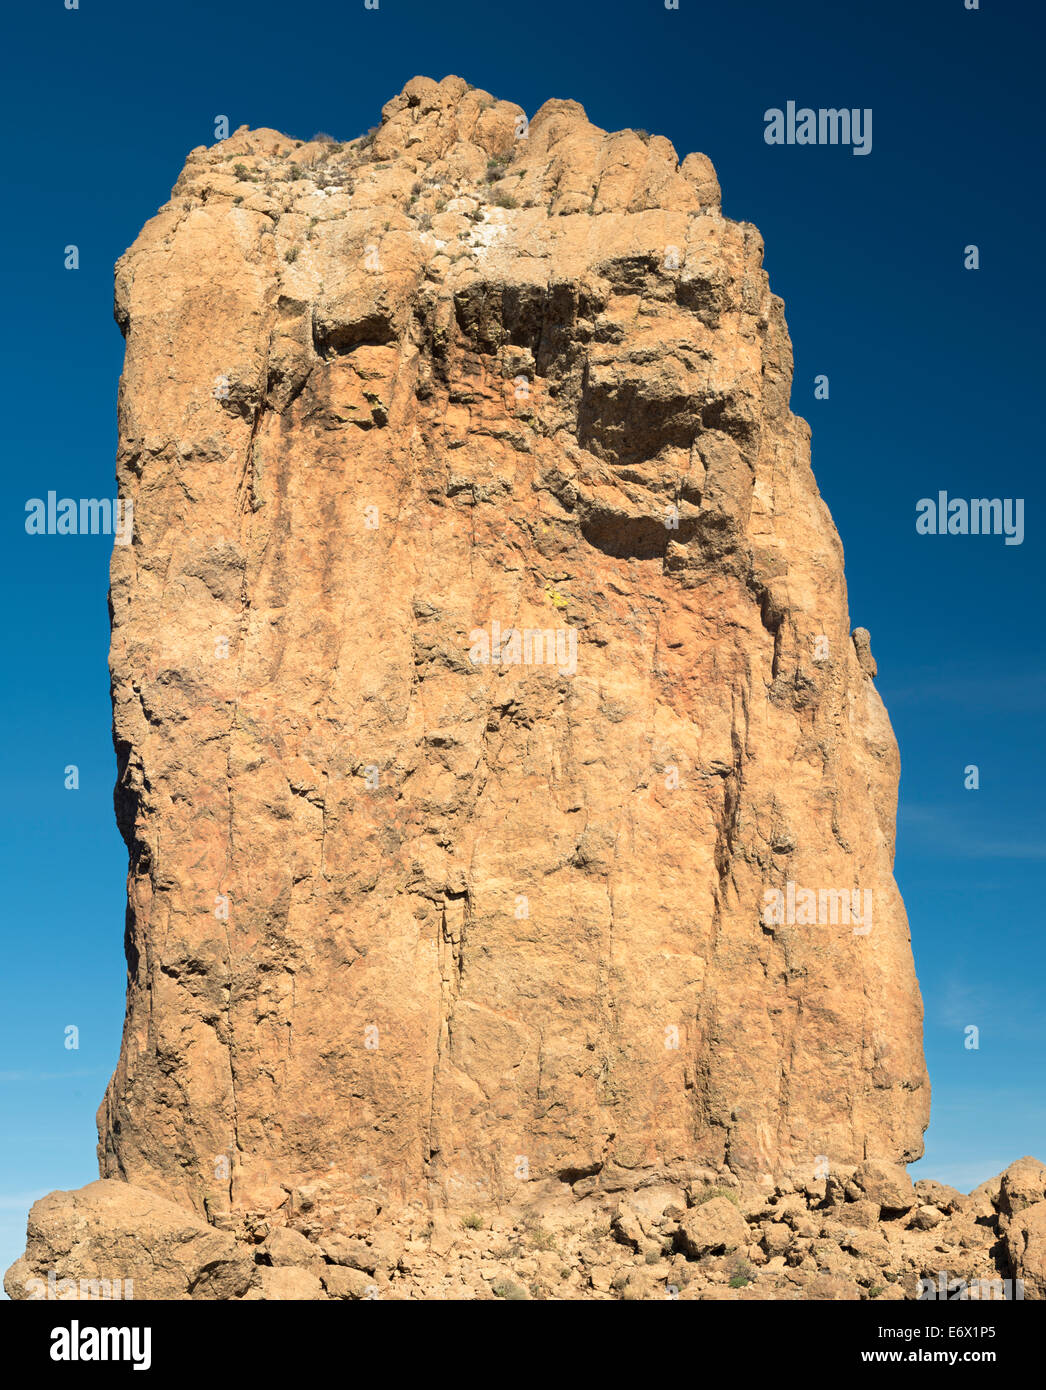 Close-up of Roque Nublo, one of the most iconic natural features of Gran Canaria, Canary Islands, Spain Stock Photo